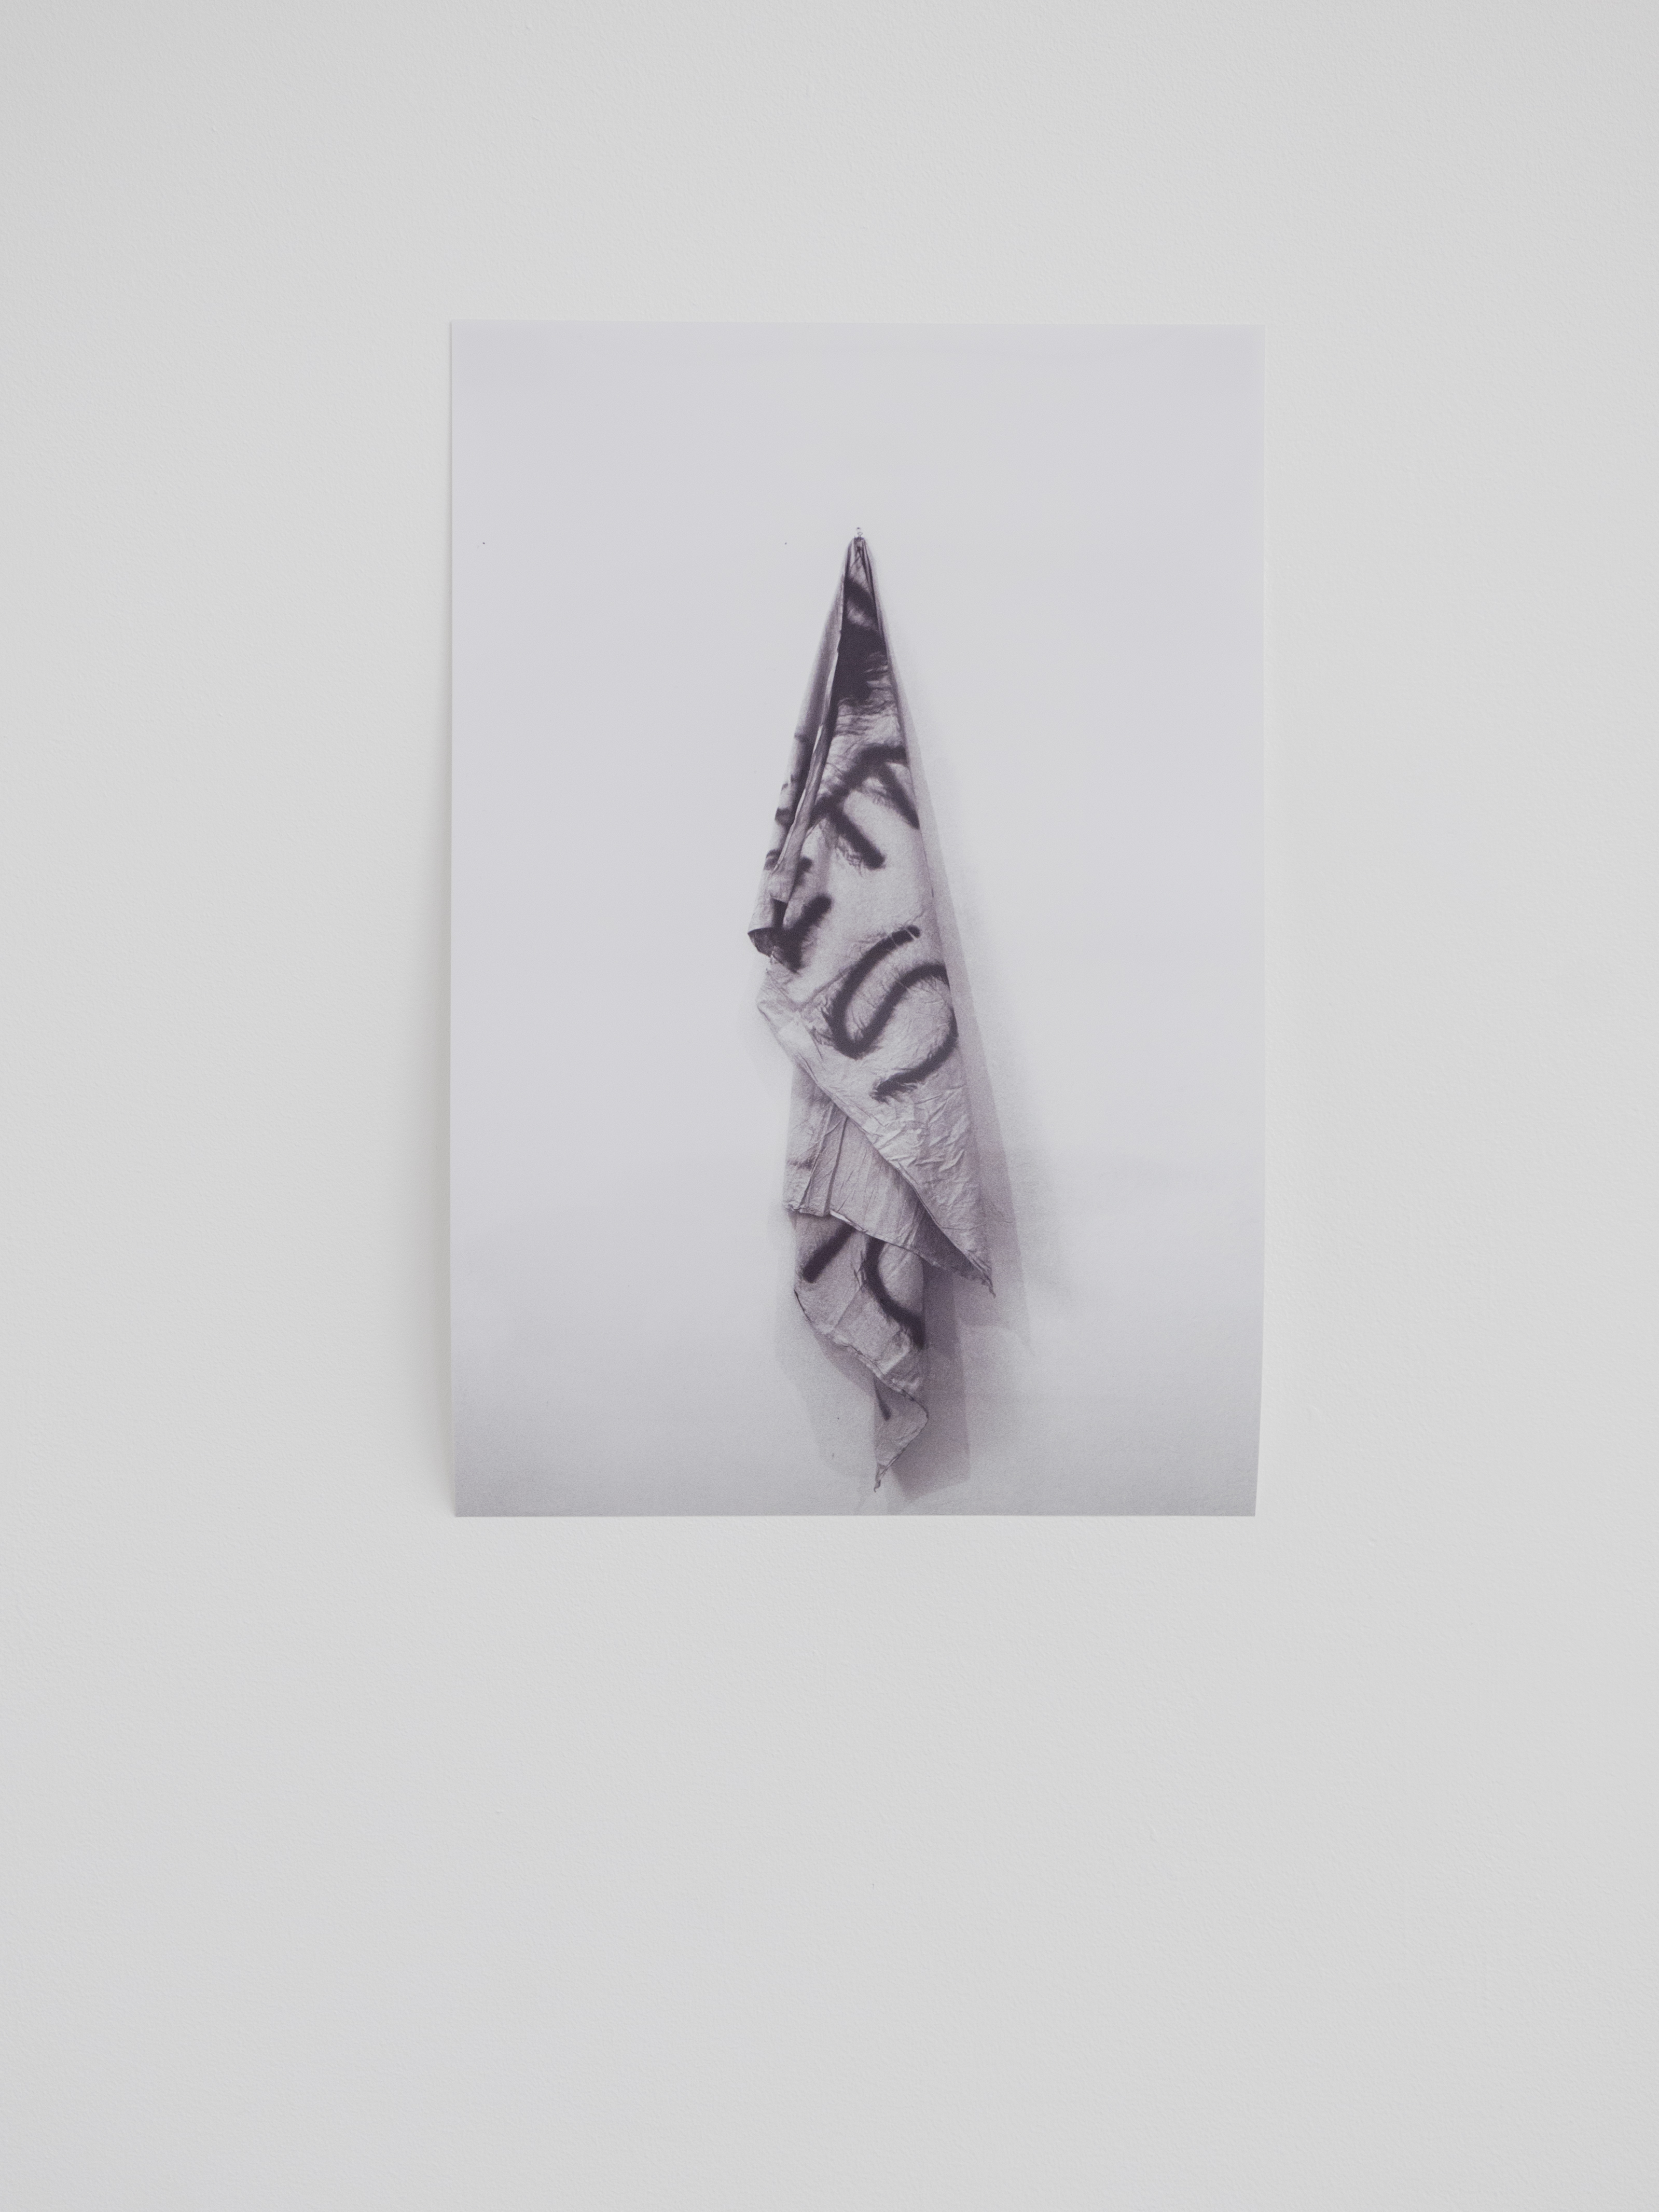 Untitled (2016) medium format analogue photo documentation of a ruined banner, C print 28x35